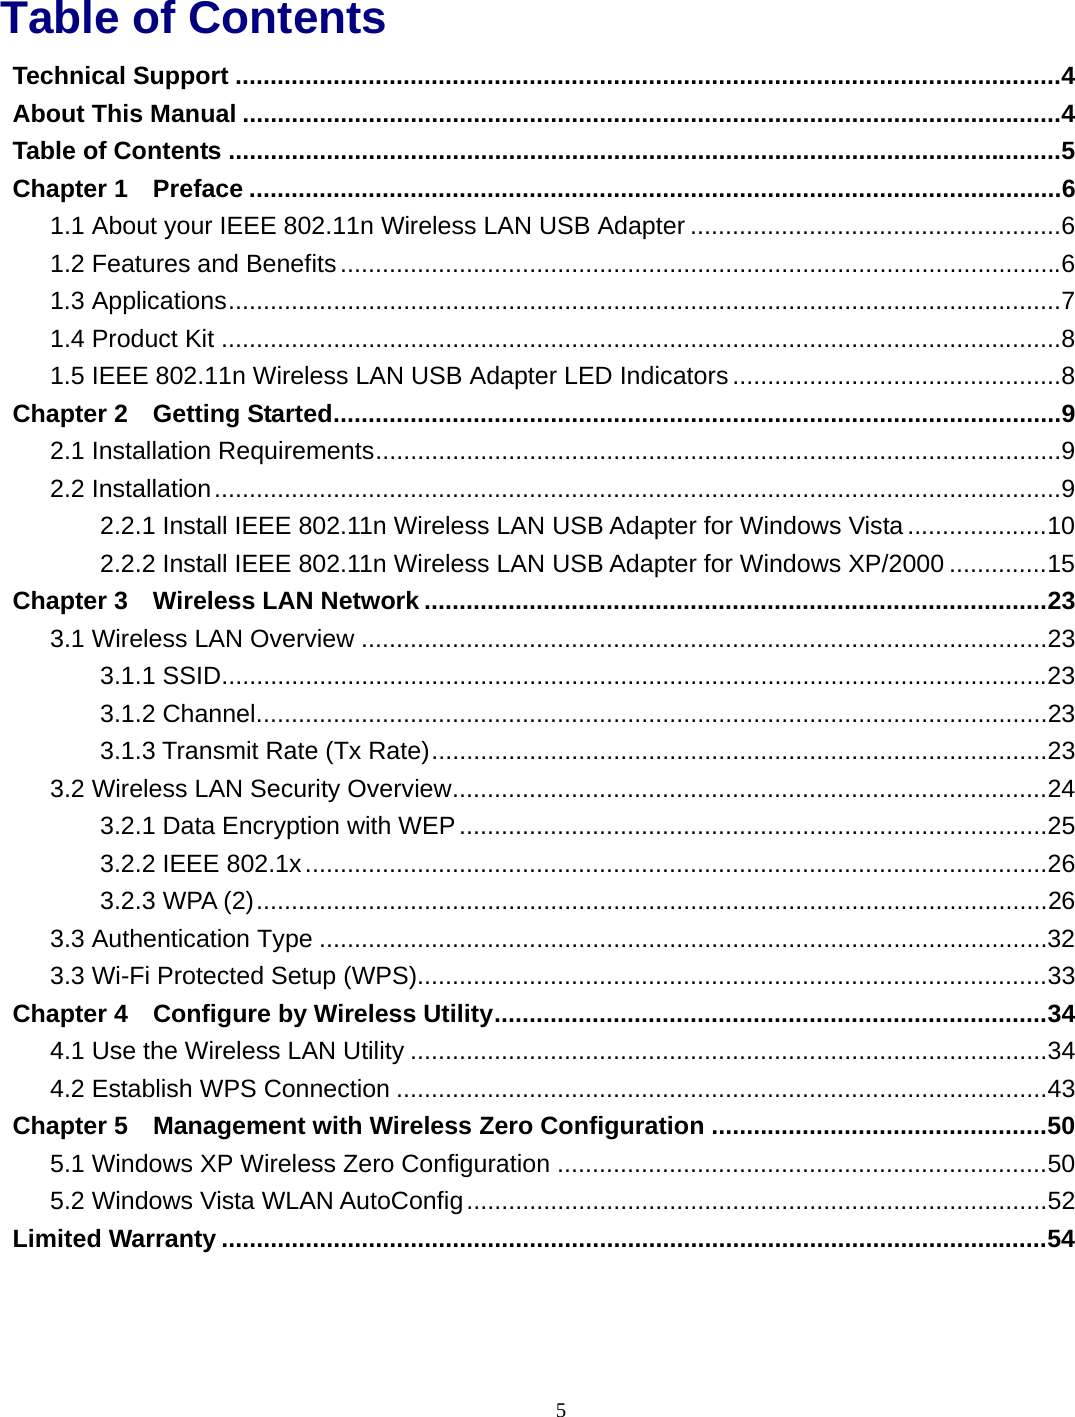  5 Table of Contents Technical Support ......................................................................................................................4 About This Manual .....................................................................................................................4 Table of Contents .......................................................................................................................5 Chapter 1 Preface ....................................................................................................................6 1.1 About your IEEE 802.11n Wireless LAN USB Adapter .....................................................6 1.2 Features and Benefits.......................................................................................................6 1.3 Applications.......................................................................................................................7 1.4 Product Kit ........................................................................................................................8 1.5 IEEE 802.11n Wireless LAN USB Adapter LED Indicators ...............................................8 Chapter 2 Getting Started........................................................................................................9 2.1 Installation Requirements..................................................................................................9 2.2 Installation.........................................................................................................................9 2.2.1 Install IEEE 802.11n Wireless LAN USB Adapter for Windows Vista....................10 2.2.2 Install IEEE 802.11n Wireless LAN USB Adapter for Windows XP/2000 ..............15 Chapter 3 Wireless LAN Network .........................................................................................23 3.1 Wireless LAN Overview ..................................................................................................23 3.1.1 SSID......................................................................................................................23 3.1.2 Channel.................................................................................................................23 3.1.3 Transmit Rate (Tx Rate)........................................................................................23 3.2 Wireless LAN Security Overview.....................................................................................24 3.2.1 Data Encryption with WEP....................................................................................25 3.2.2 IEEE 802.1x..........................................................................................................26 3.2.3 WPA (2).................................................................................................................26 3.3 Authentication Type ........................................................................................................32 3.3 Wi-Fi Protected Setup (WPS)..........................................................................................33 Chapter 4 Configure by Wireless Utility...............................................................................34 4.1 Use the Wireless LAN Utility ...........................................................................................34 4.2 Establish WPS Connection .............................................................................................43 Chapter 5 Management with Wireless Zero Configuration ................................................50 5.1 Windows XP Wireless Zero Configuration ......................................................................50 5.2 Windows Vista WLAN AutoConfig...................................................................................52 Limited Warranty ......................................................................................................................54 